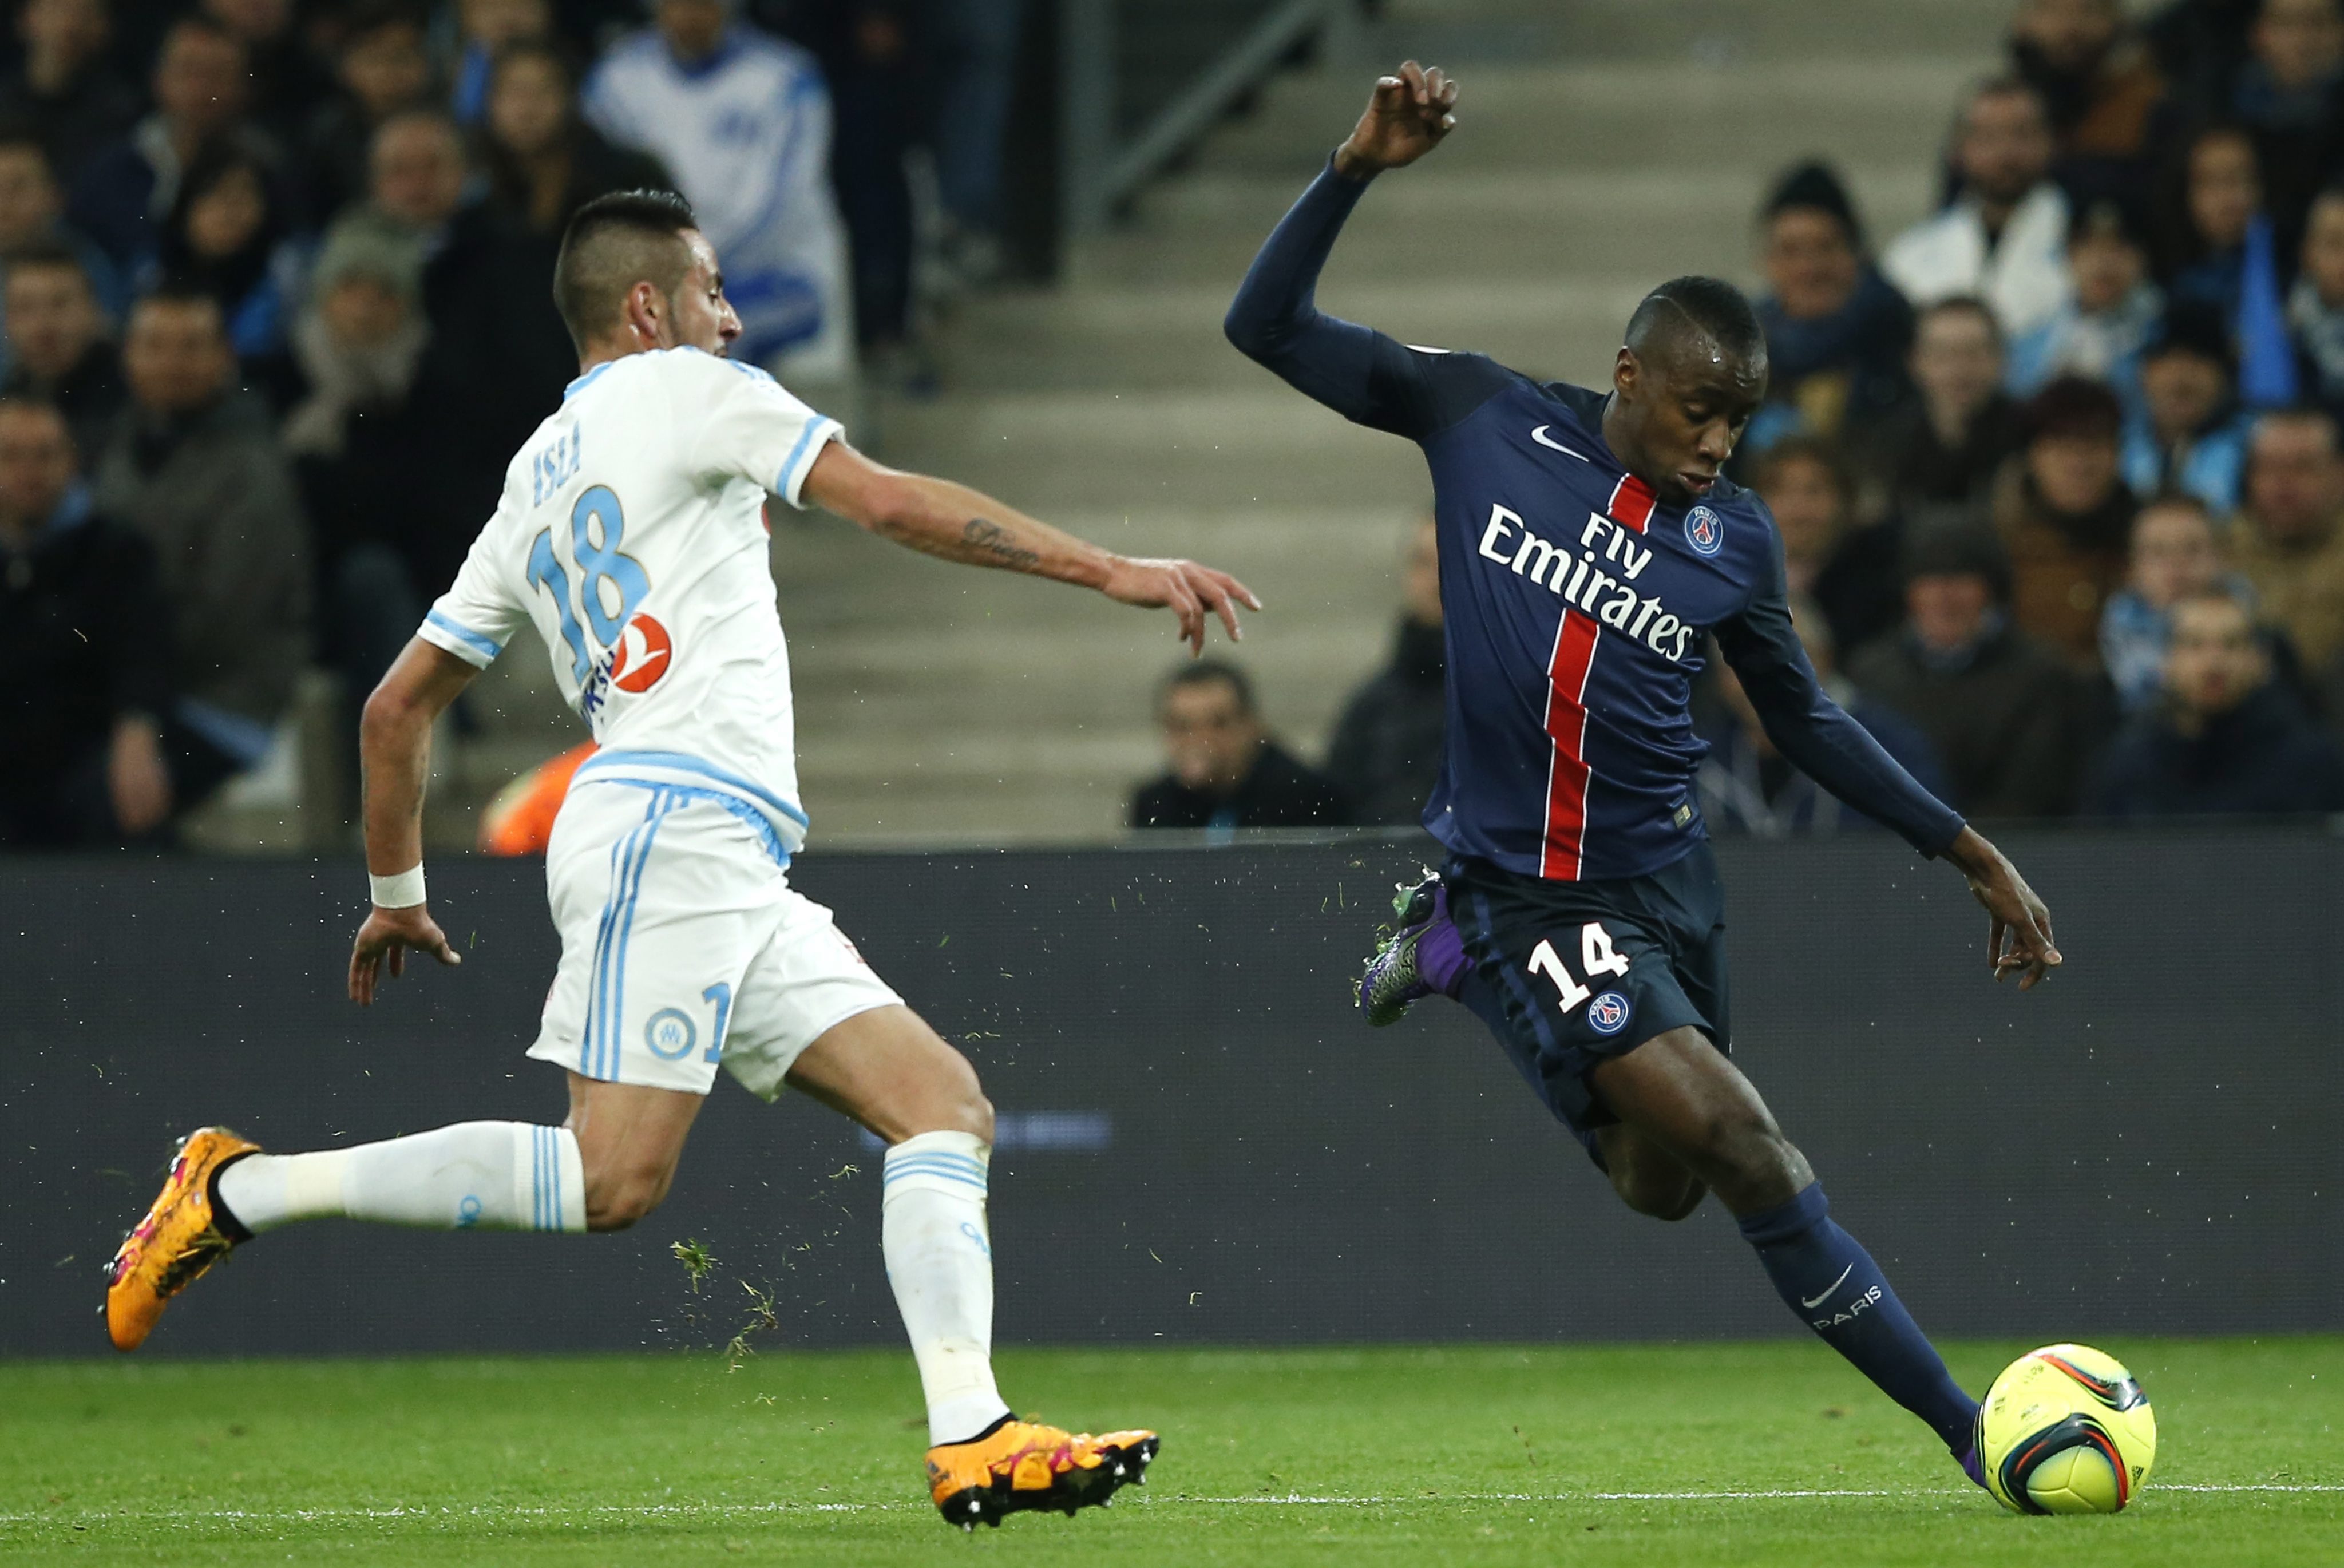 Blaise Matuidi could very well be seen honing his skills in Serie A with L'Equipe reporting that the midfielder is close to completing a move to Juventus. (Picture Courtesy - AFP/Getty Images)